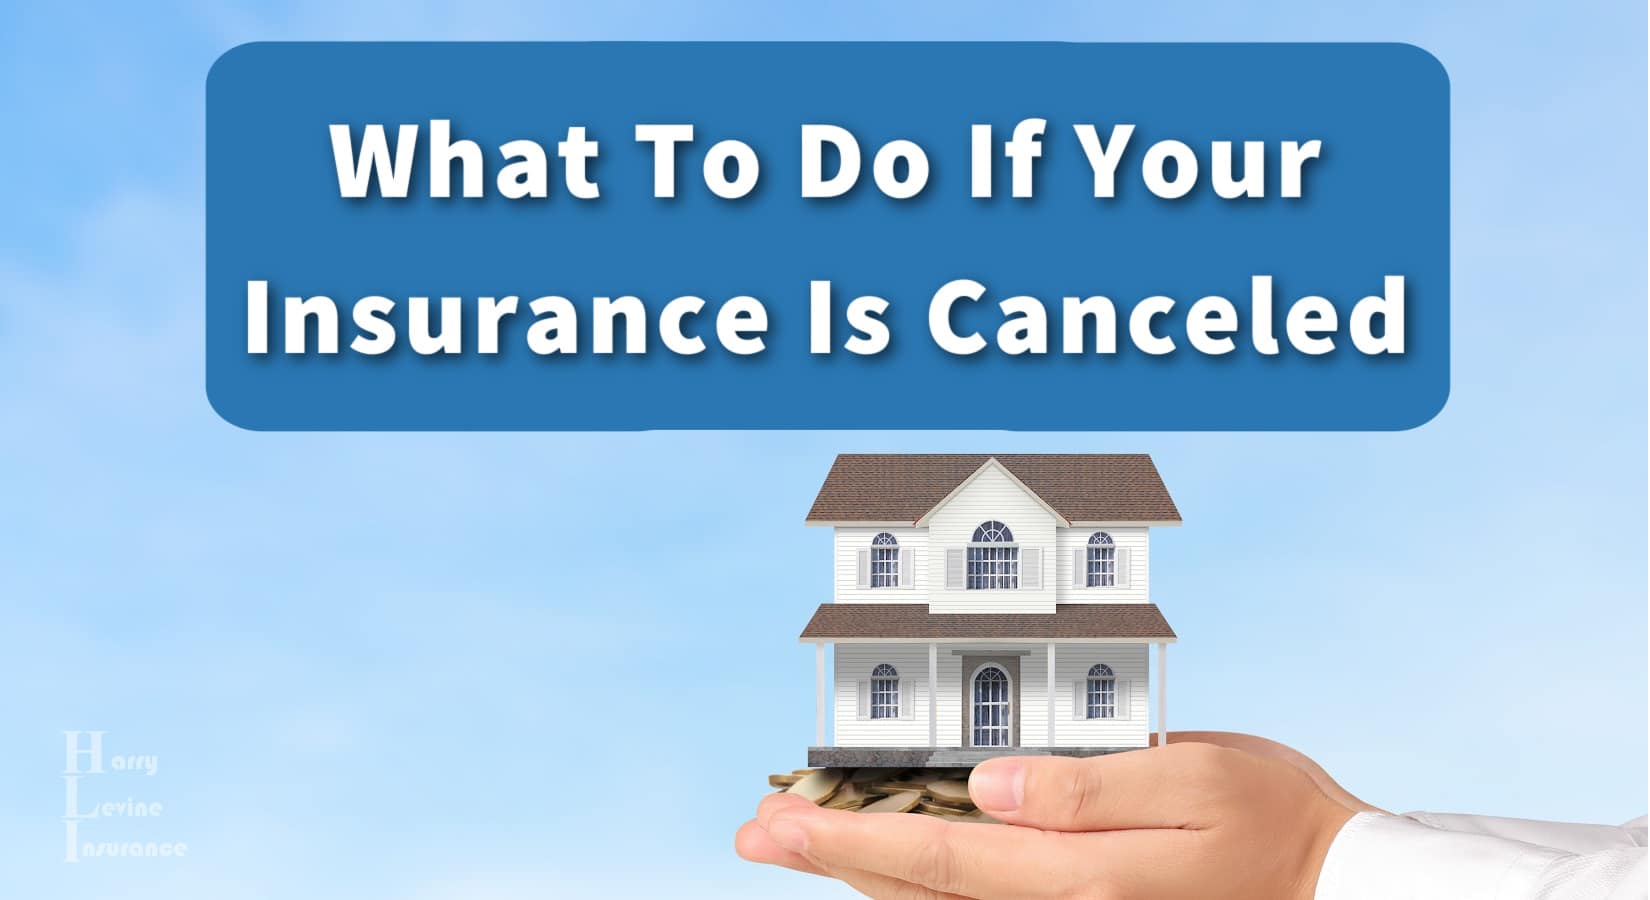 What should I do if my home insurance is cancelled? - Einhorn